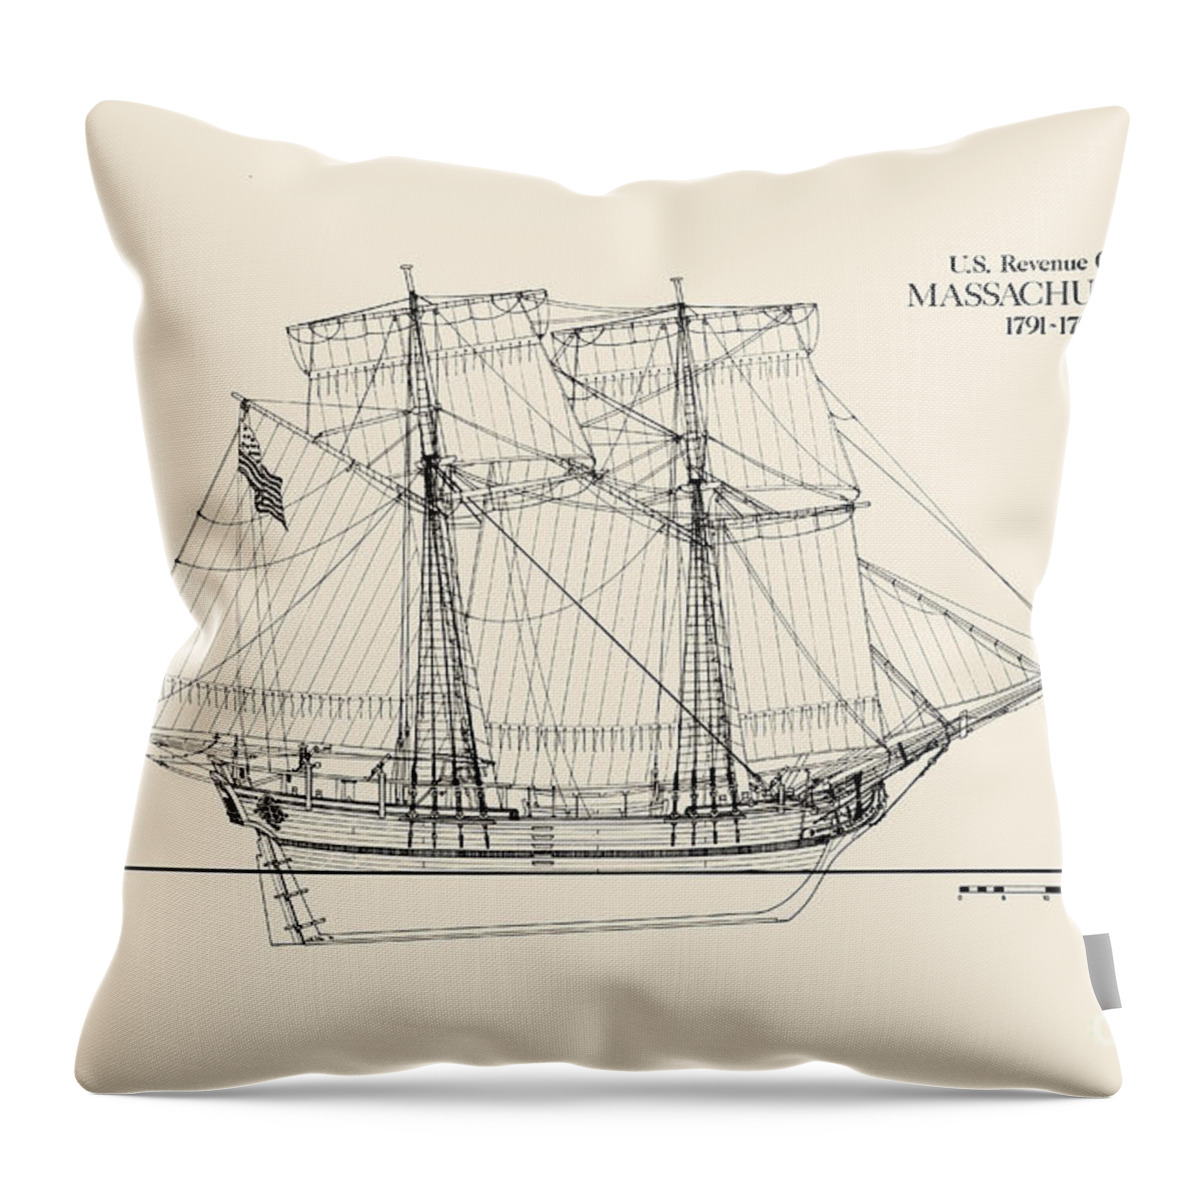 Coast Guard Throw Pillow featuring the drawing Revenue Cutter Massachusetts by Jerry McElroy